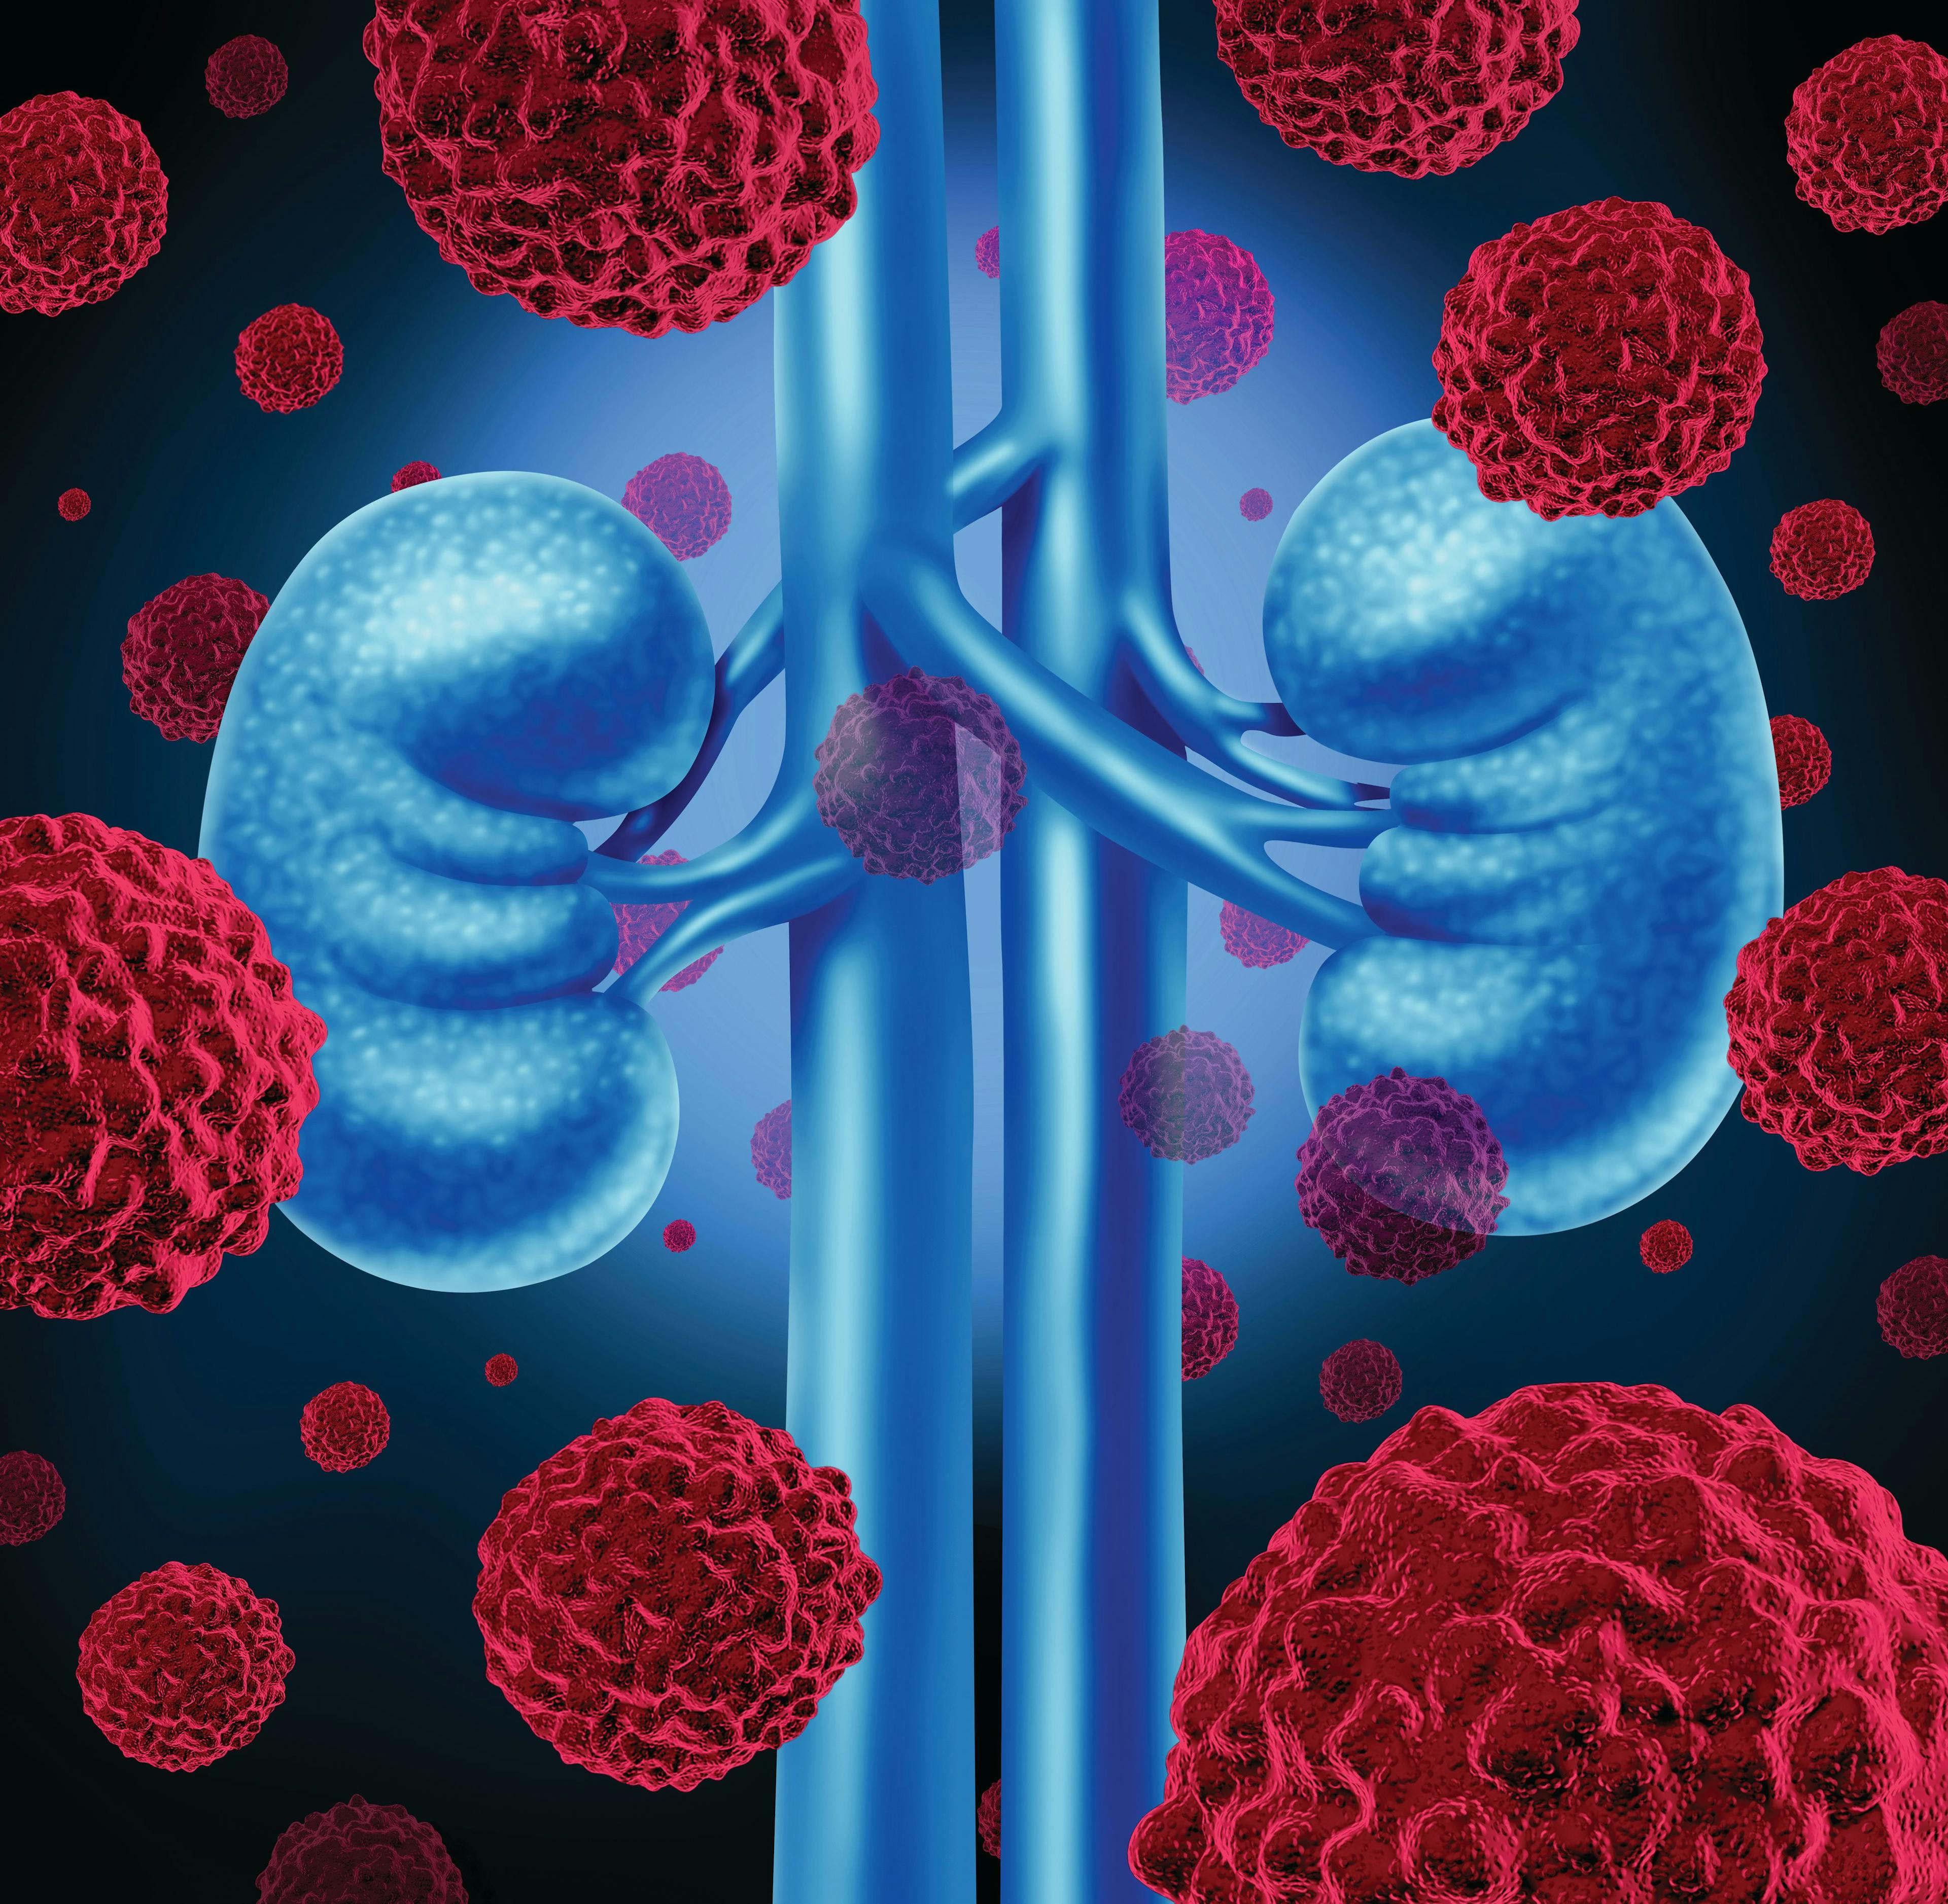 Migalastat Preserved Renal Function Over Long Term in Patients With Fabry Disease